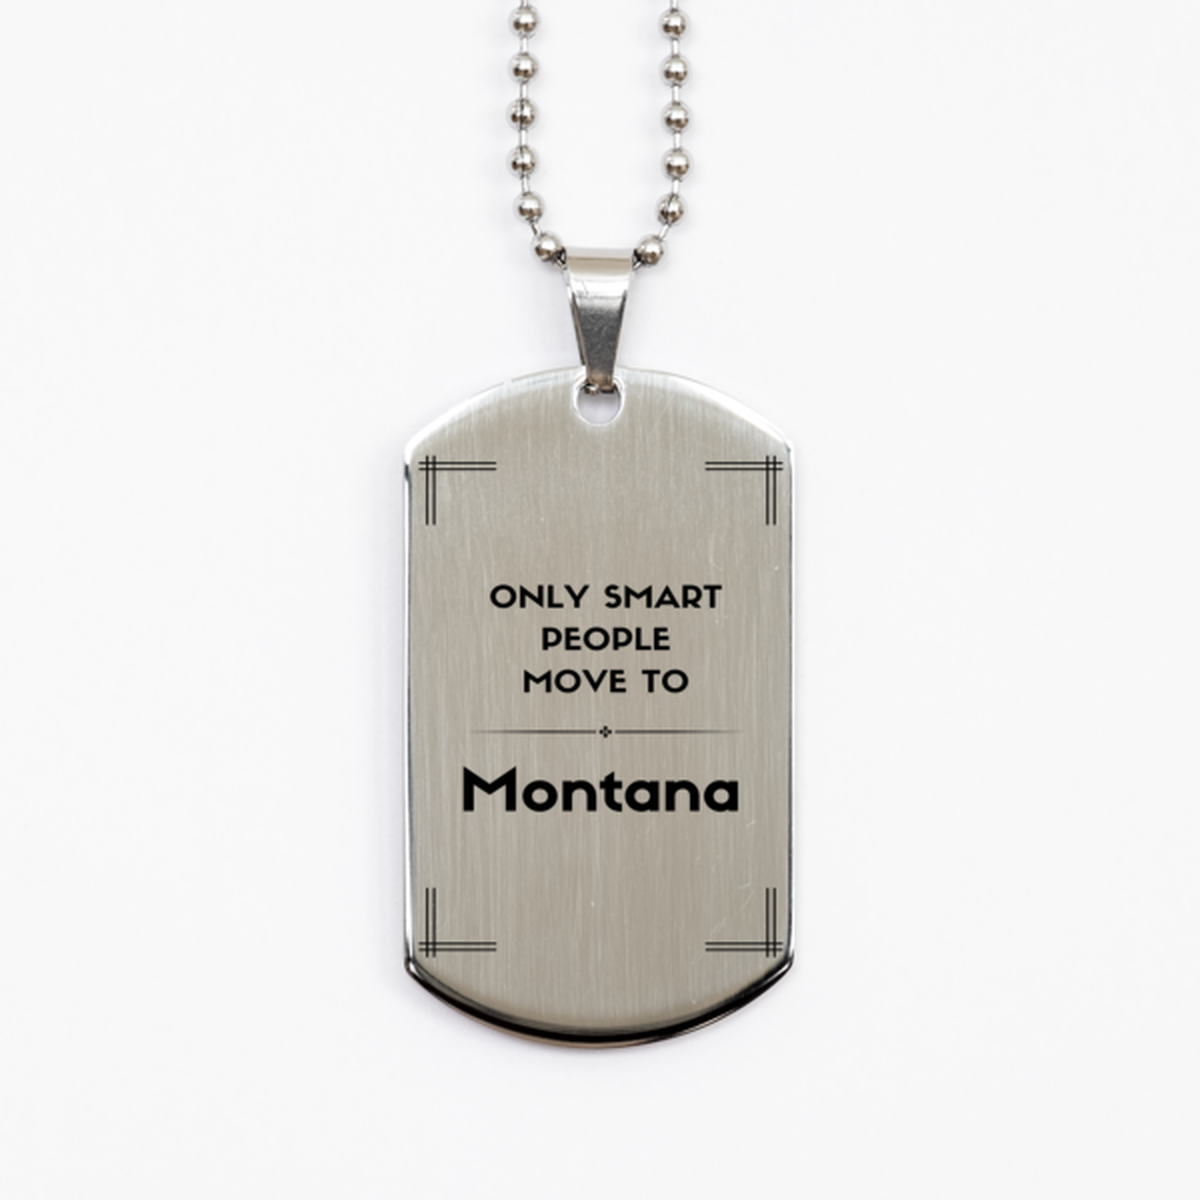 Only smart people move to Montana Silver Dog Tag, Gag Gifts For Montana, Move to Montana Gifts for Friends Coworker Funny Saying Quote